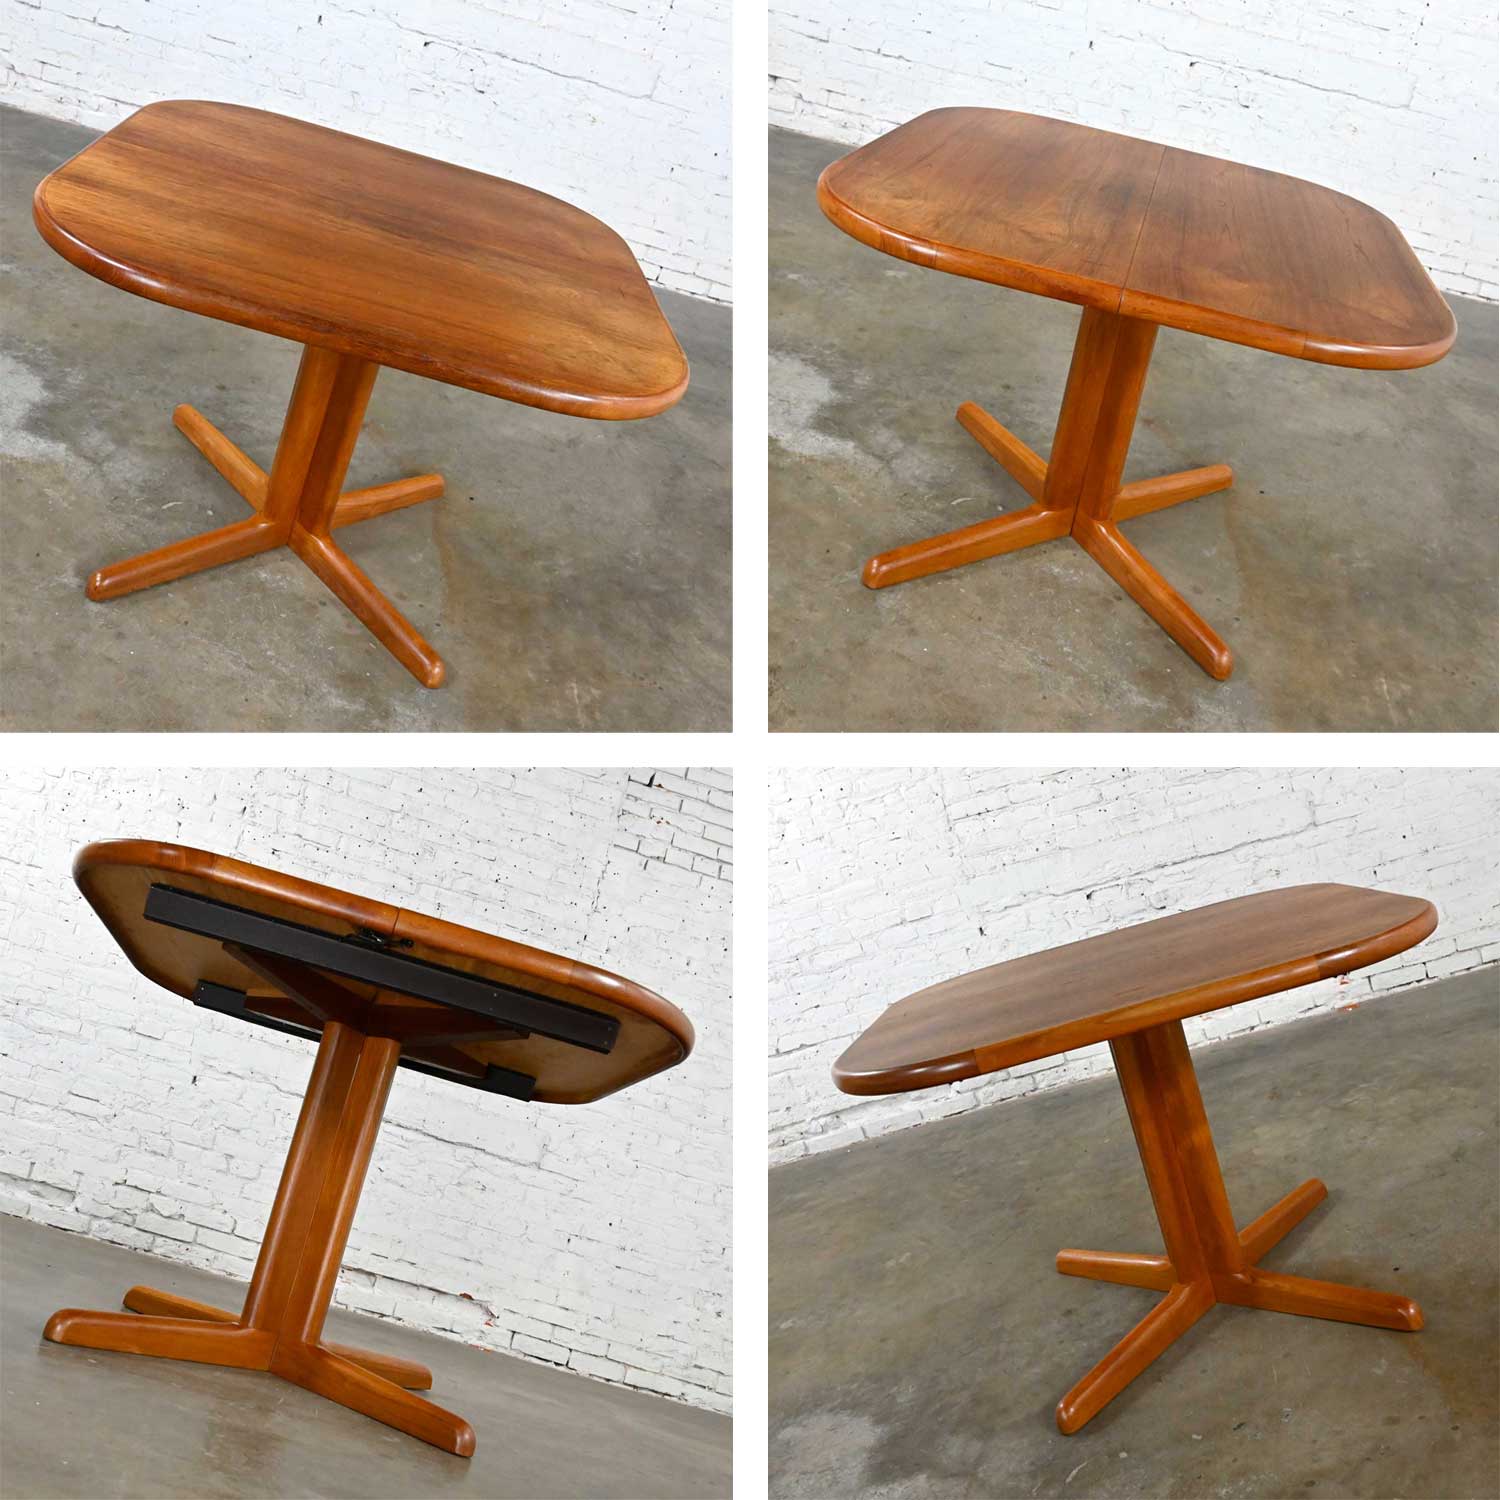 Vintage Teak Scandinavian Modern Expanding Dining Table with 2 Leaves Style Neils Moller